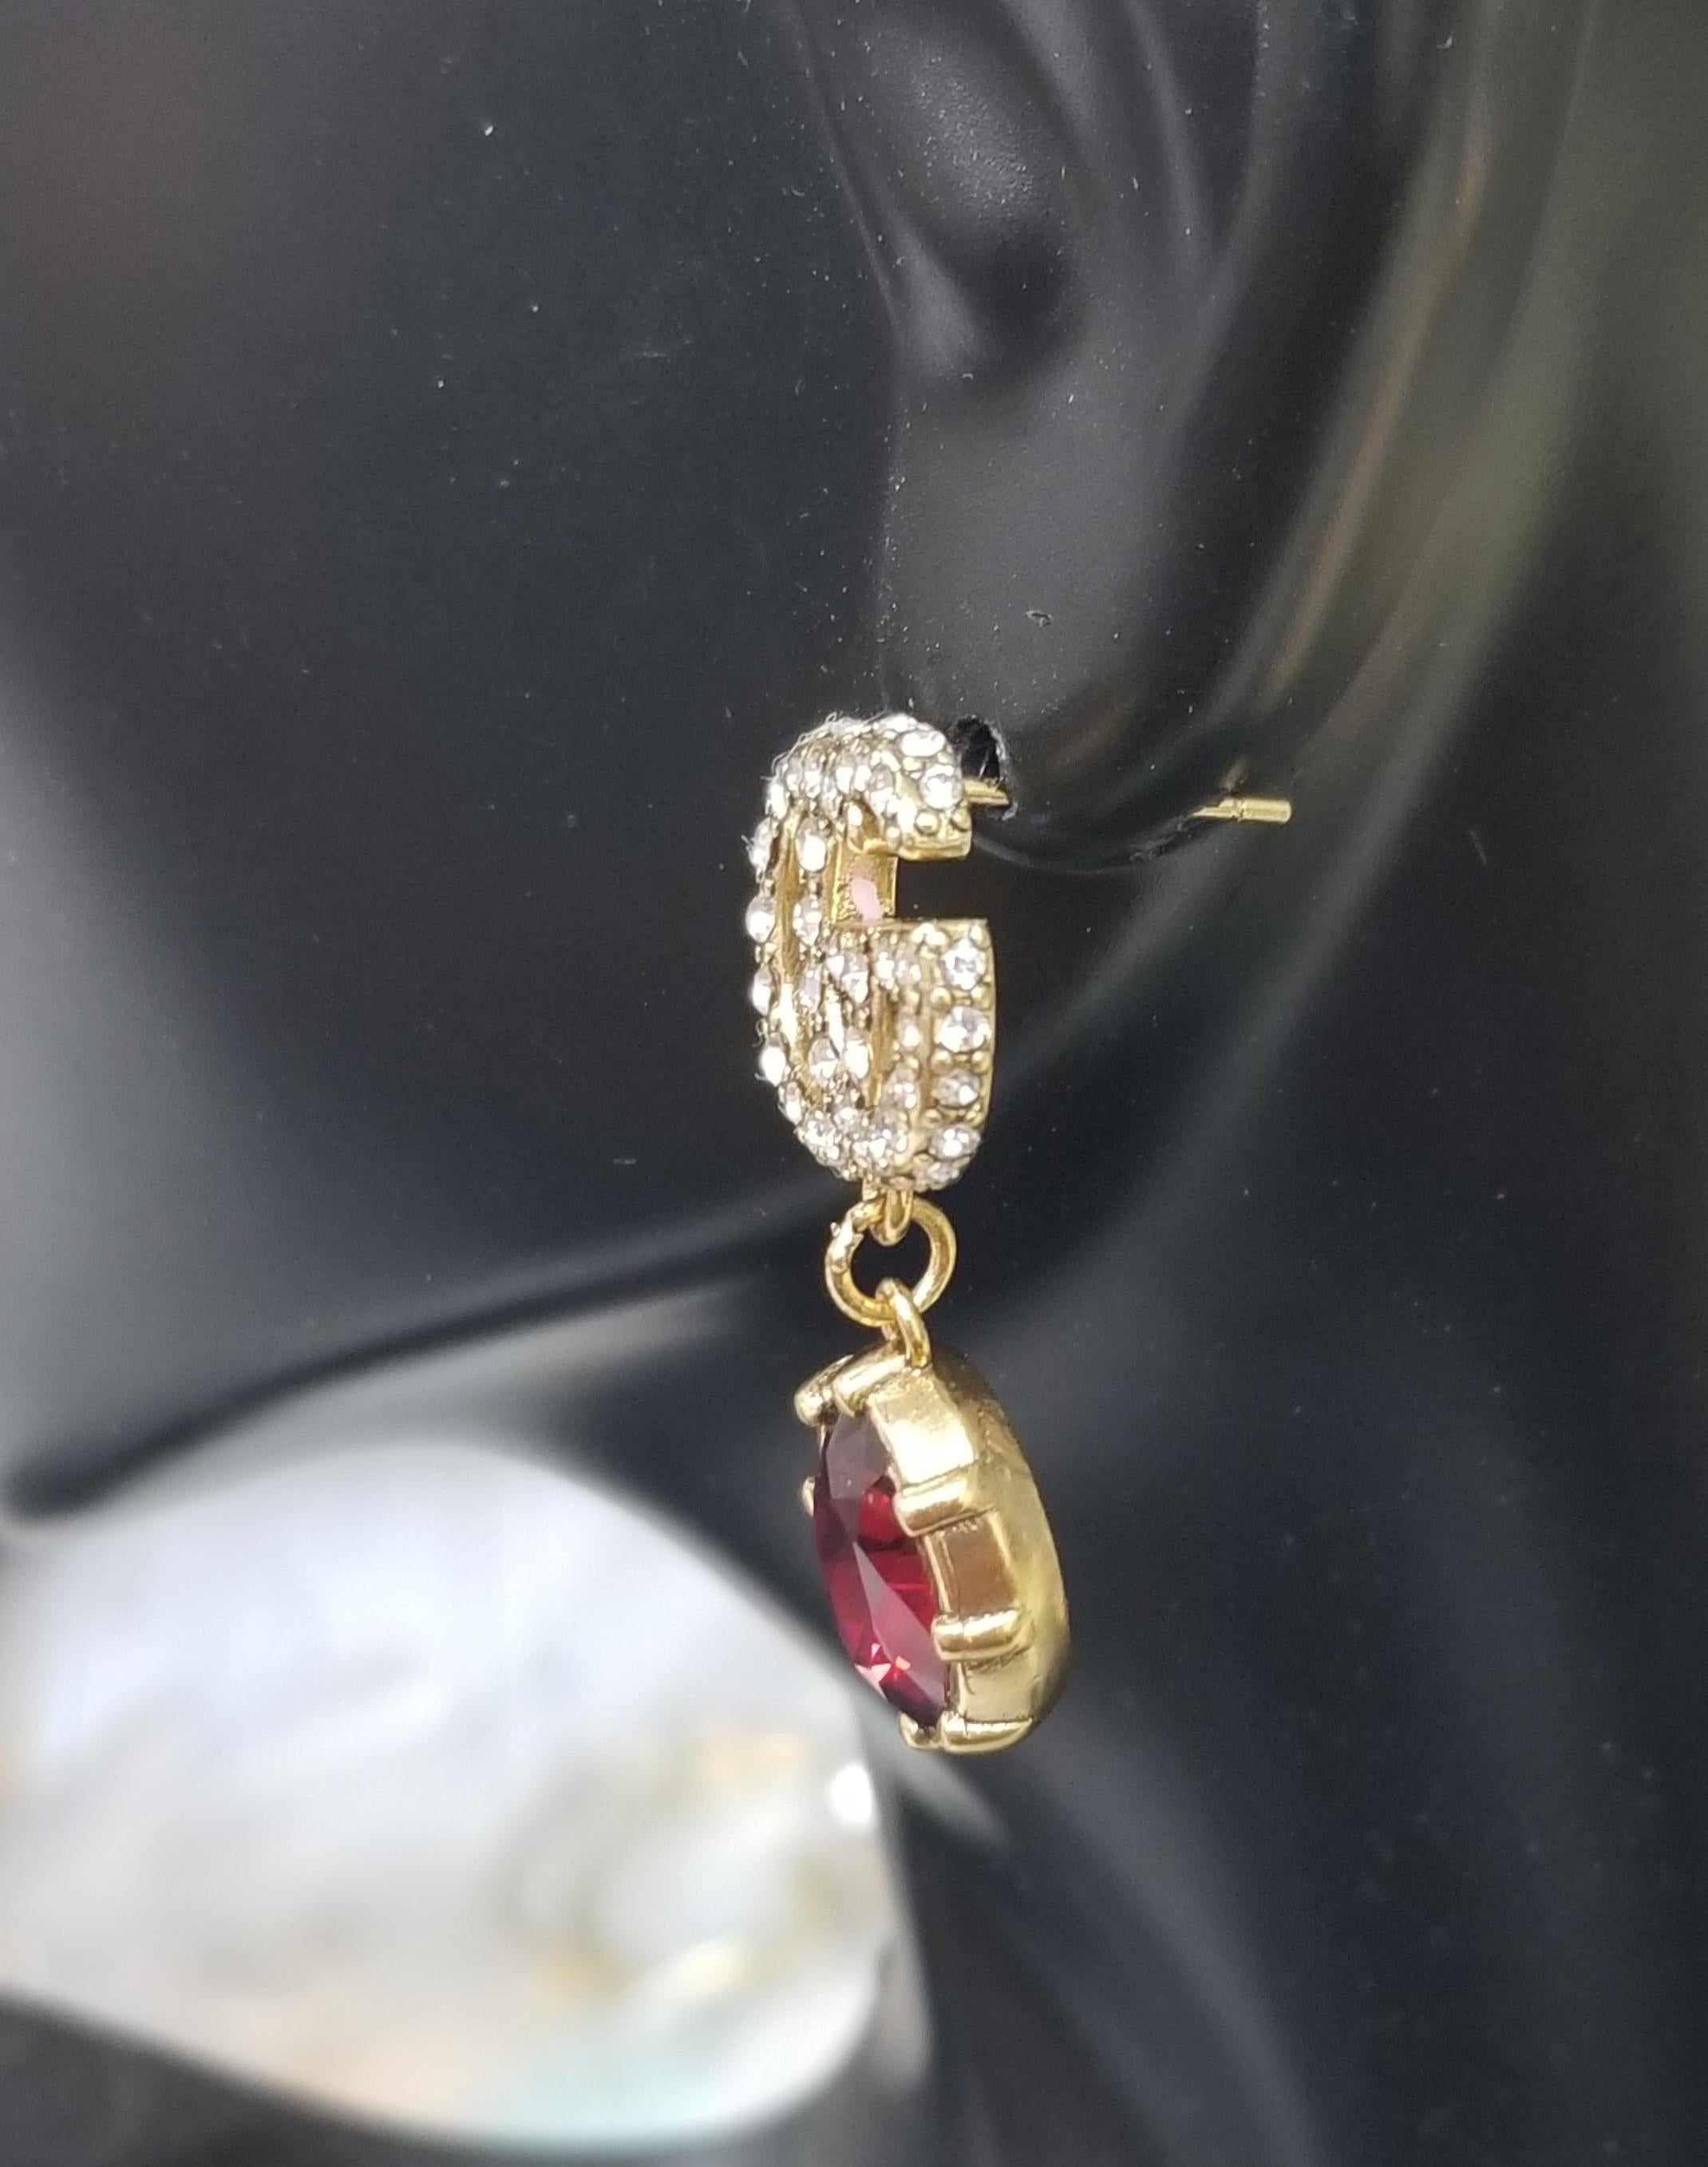 gucci crystal double g earrings